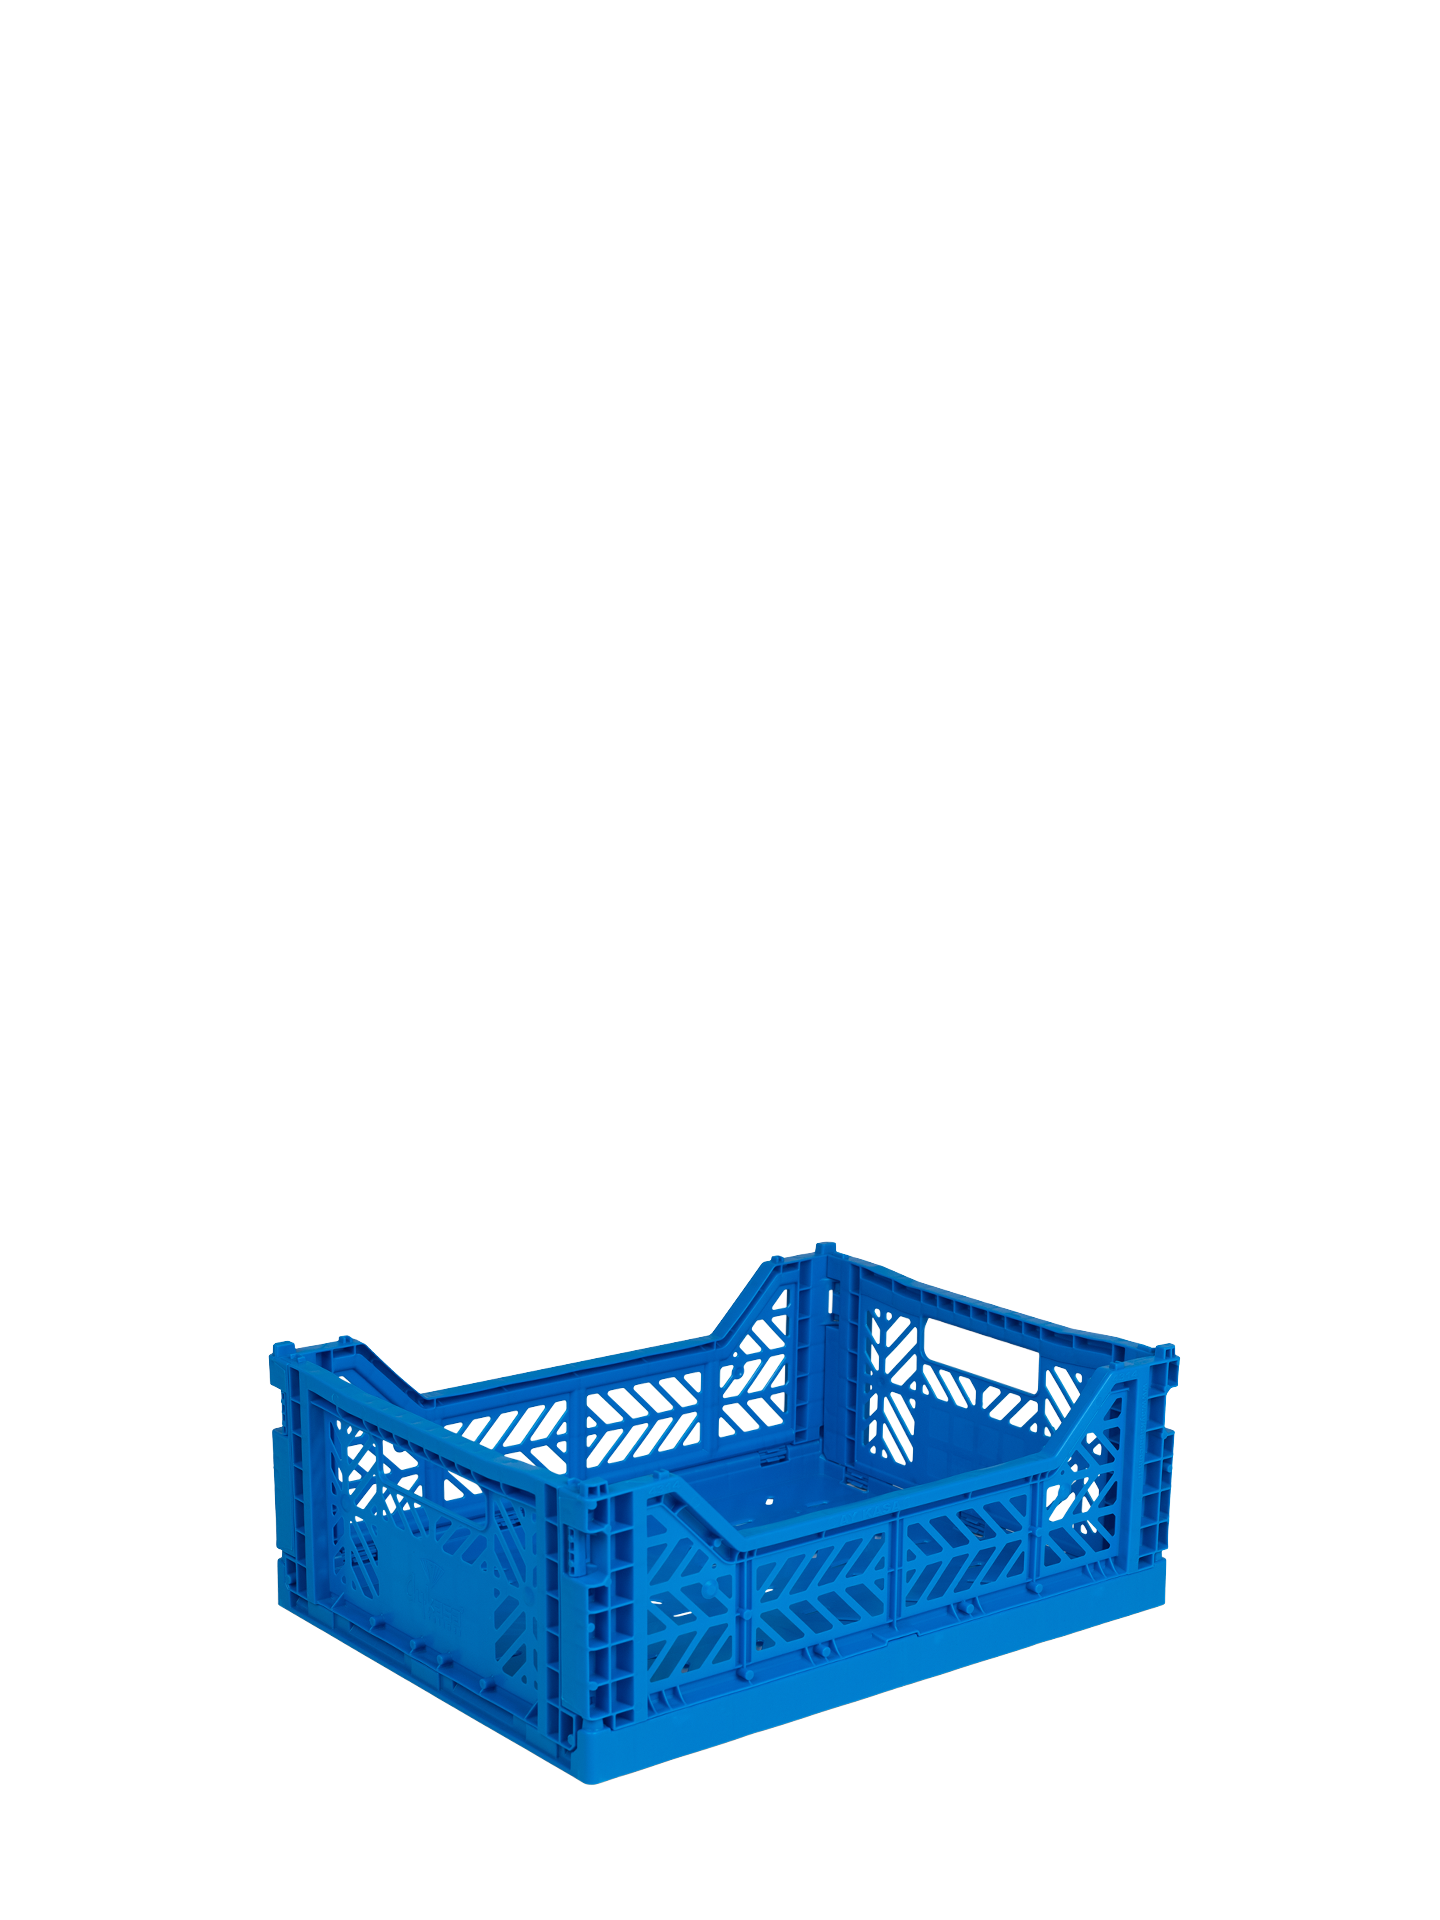 Easy to fold when not in use, the Aykasa medium size plastic storage crate in Electric blue can be stacked on top of each other and the colour range has a perfect hue for any room.